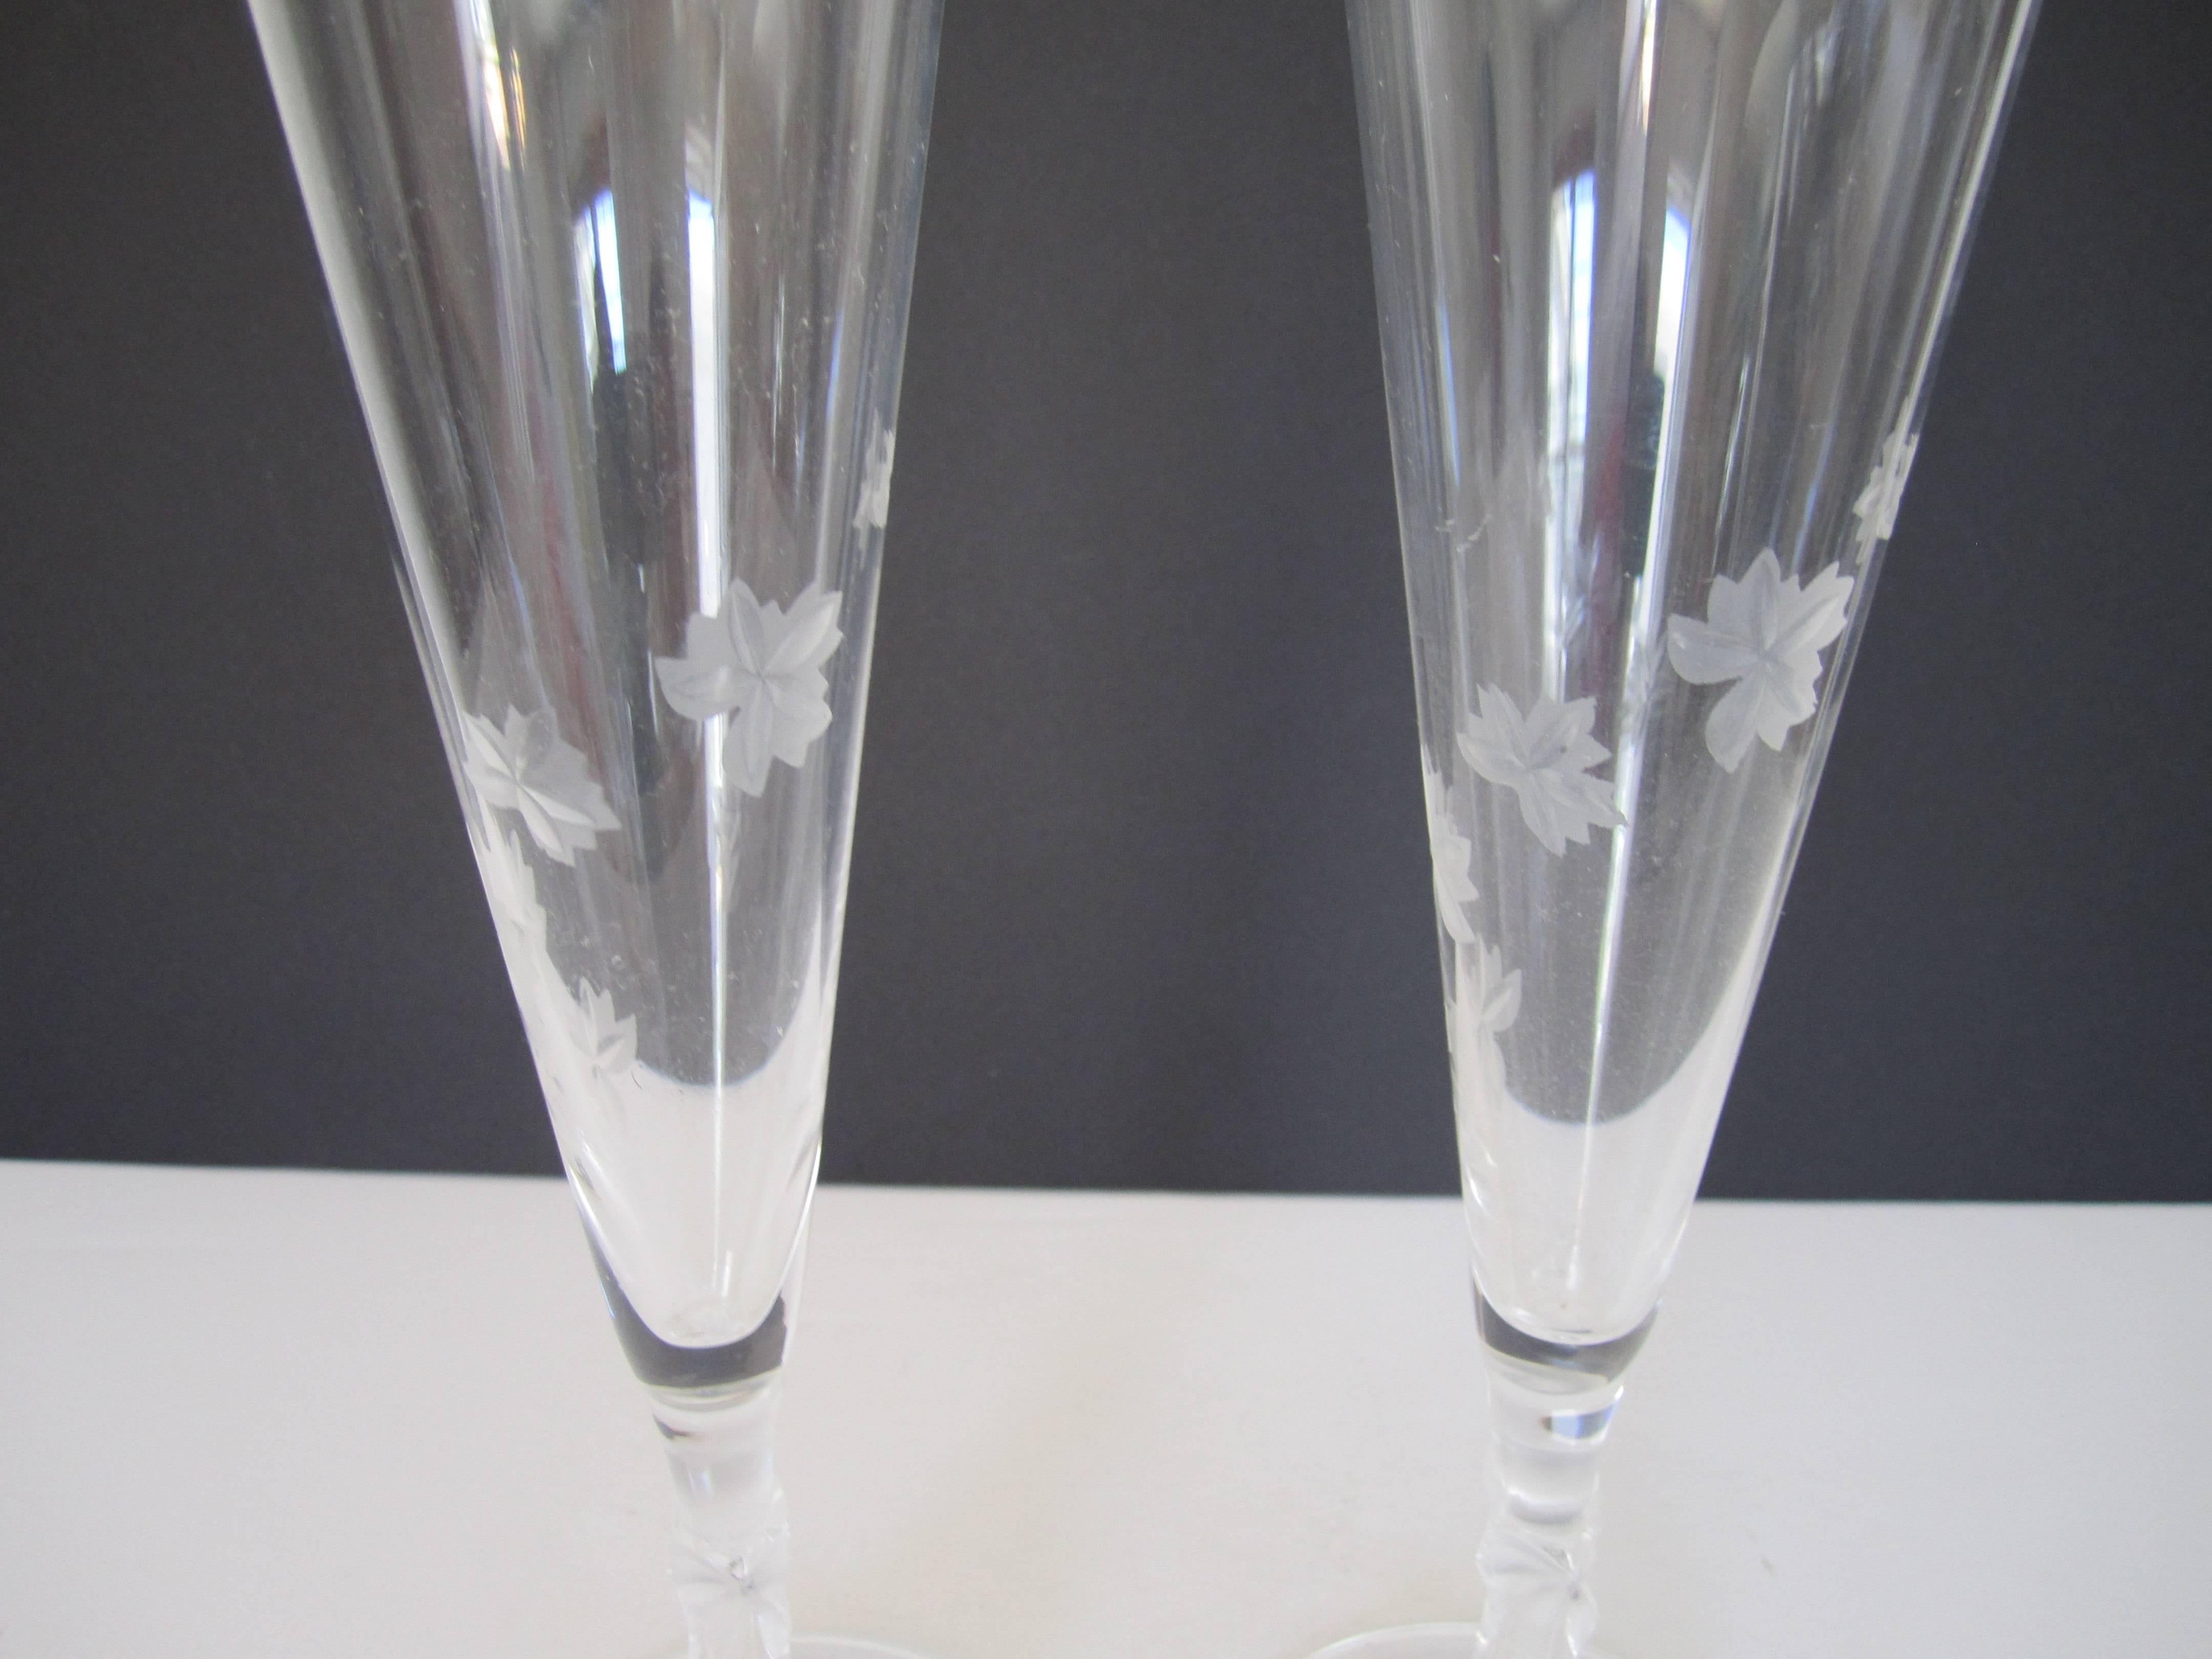 20th Century Pair of Vintage Signed Lalique Champagne Flute Glasses